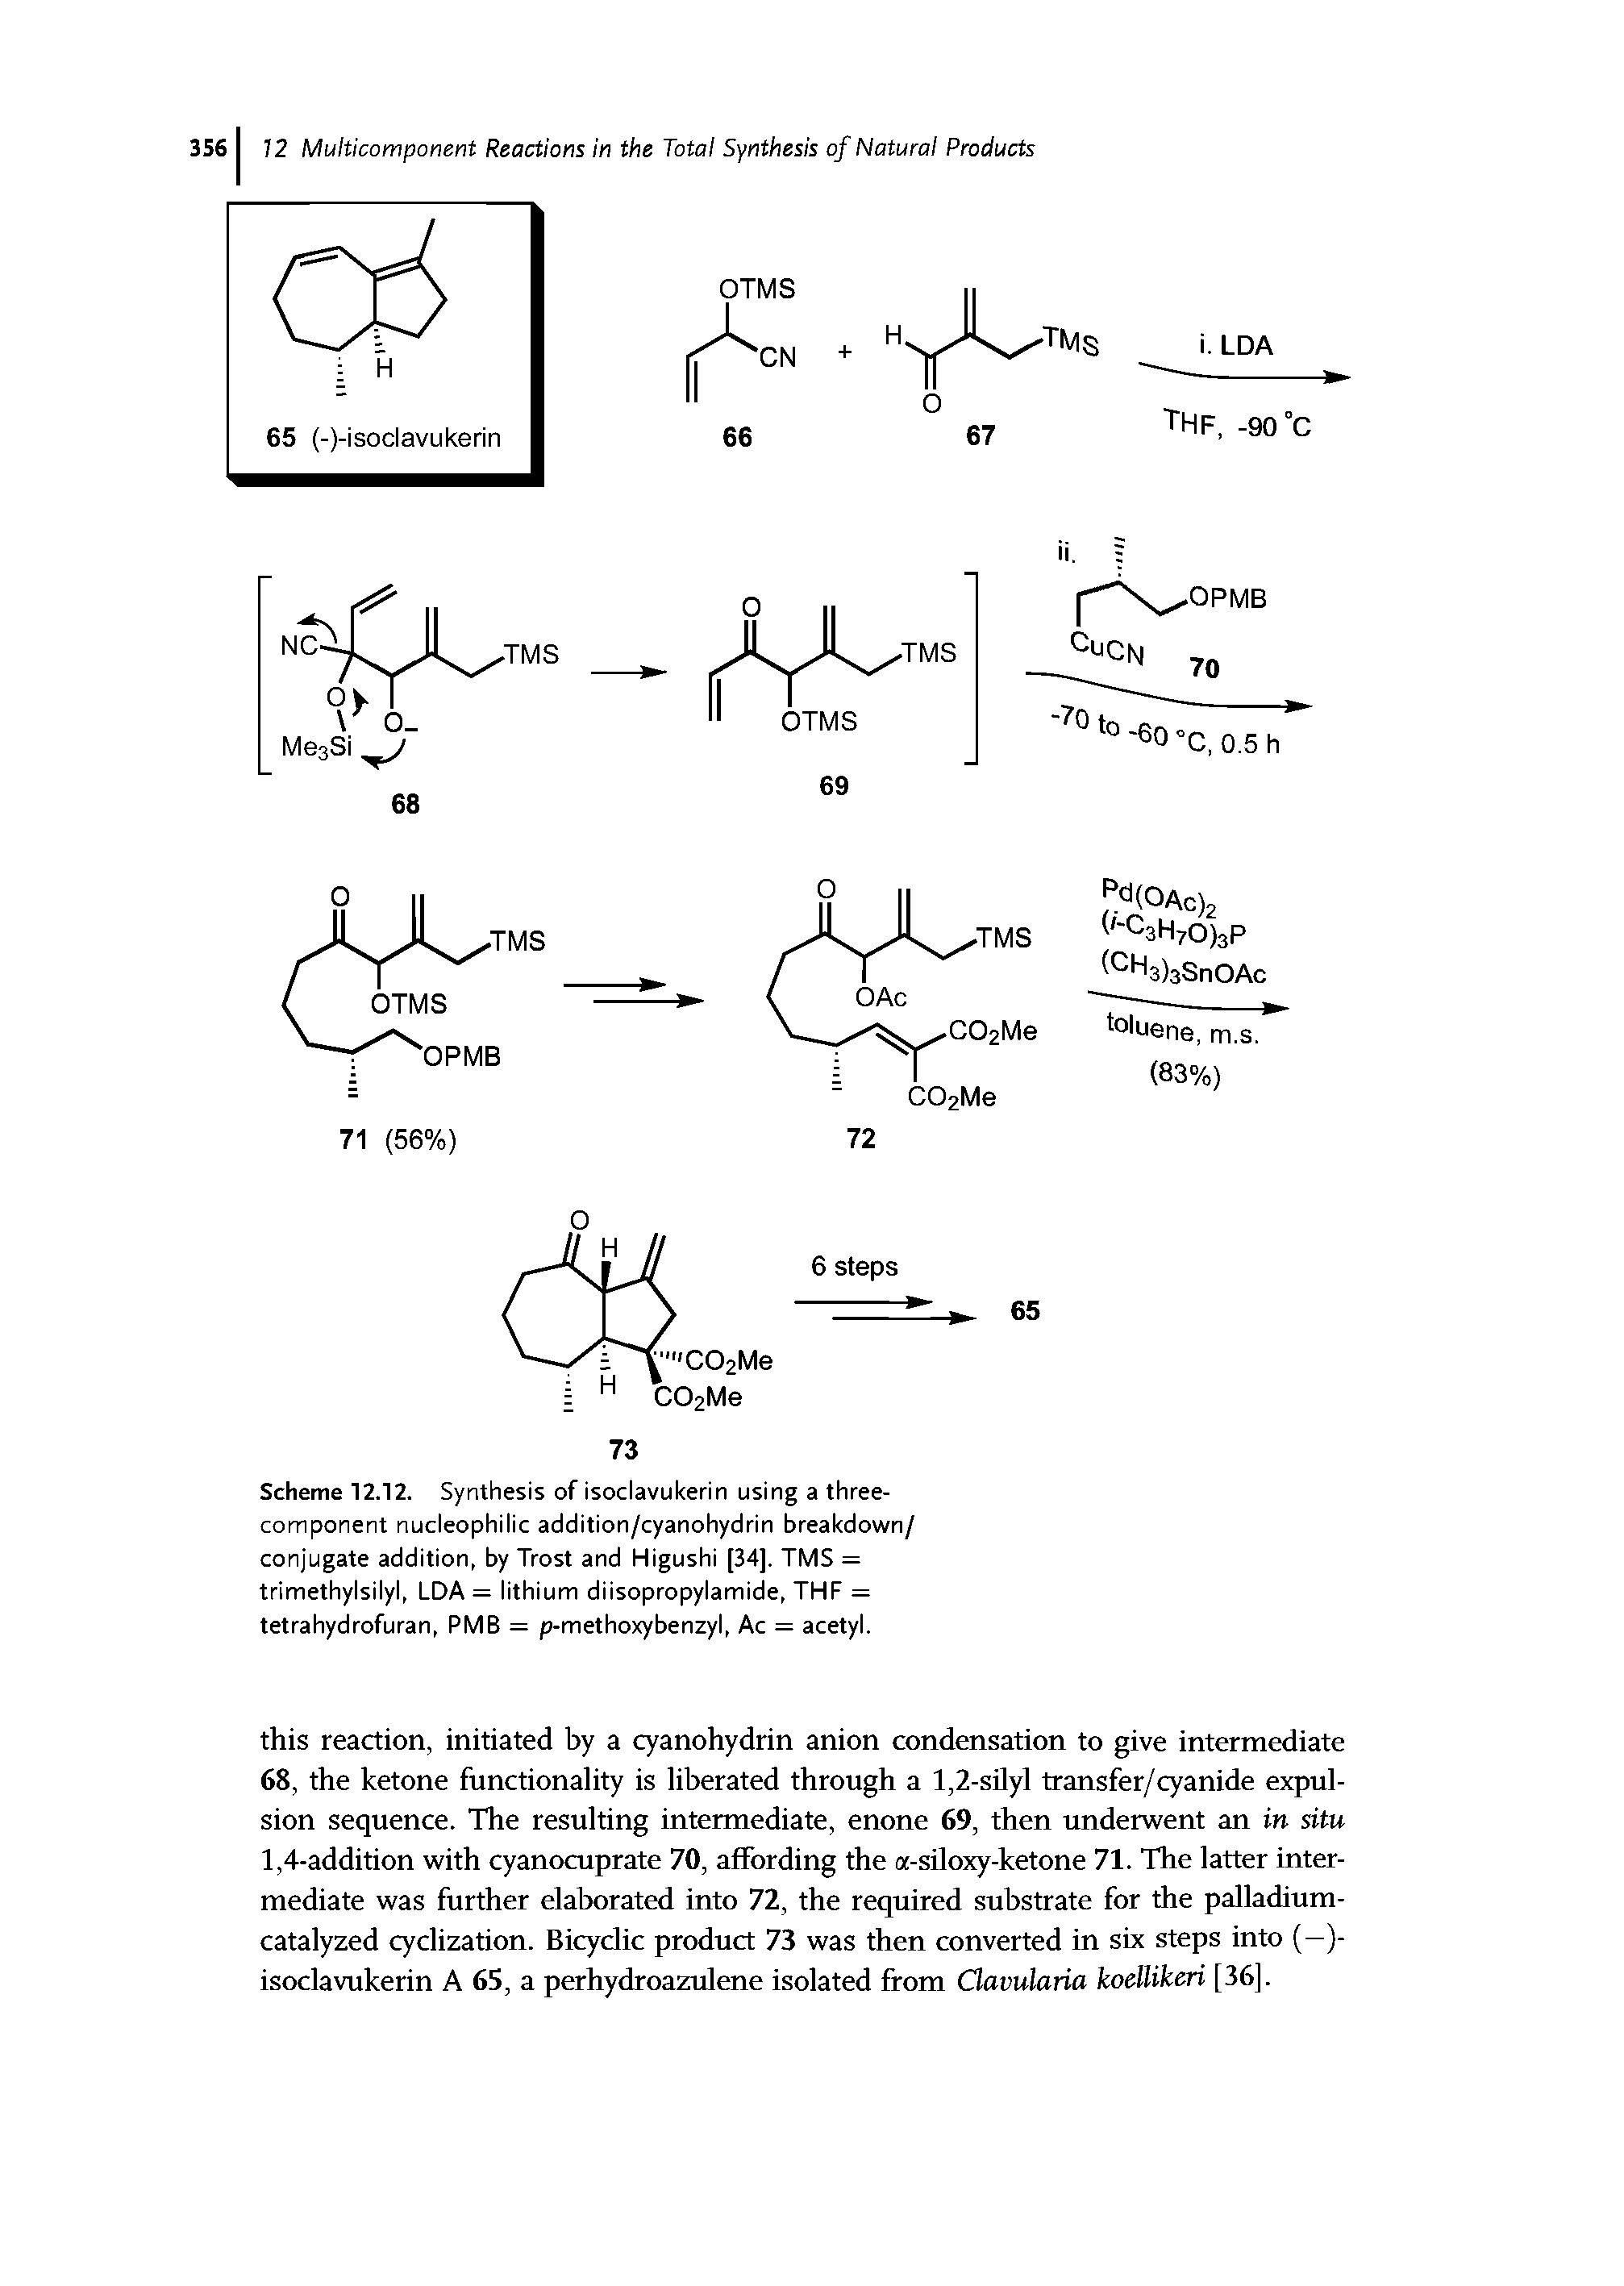 Scheme 12.12. Synthesis of isoclavukerin using a three-component nucleophilic addition/cyanohydrin breakdown/ conjugate addition, by Trost and Higushi [34]. TMS = trimethylsilyl, LDA = lithium diisopropylamide, THF = tetrahydrofuran, PMB = p-methoxybenzyl, Ac = acetyl.